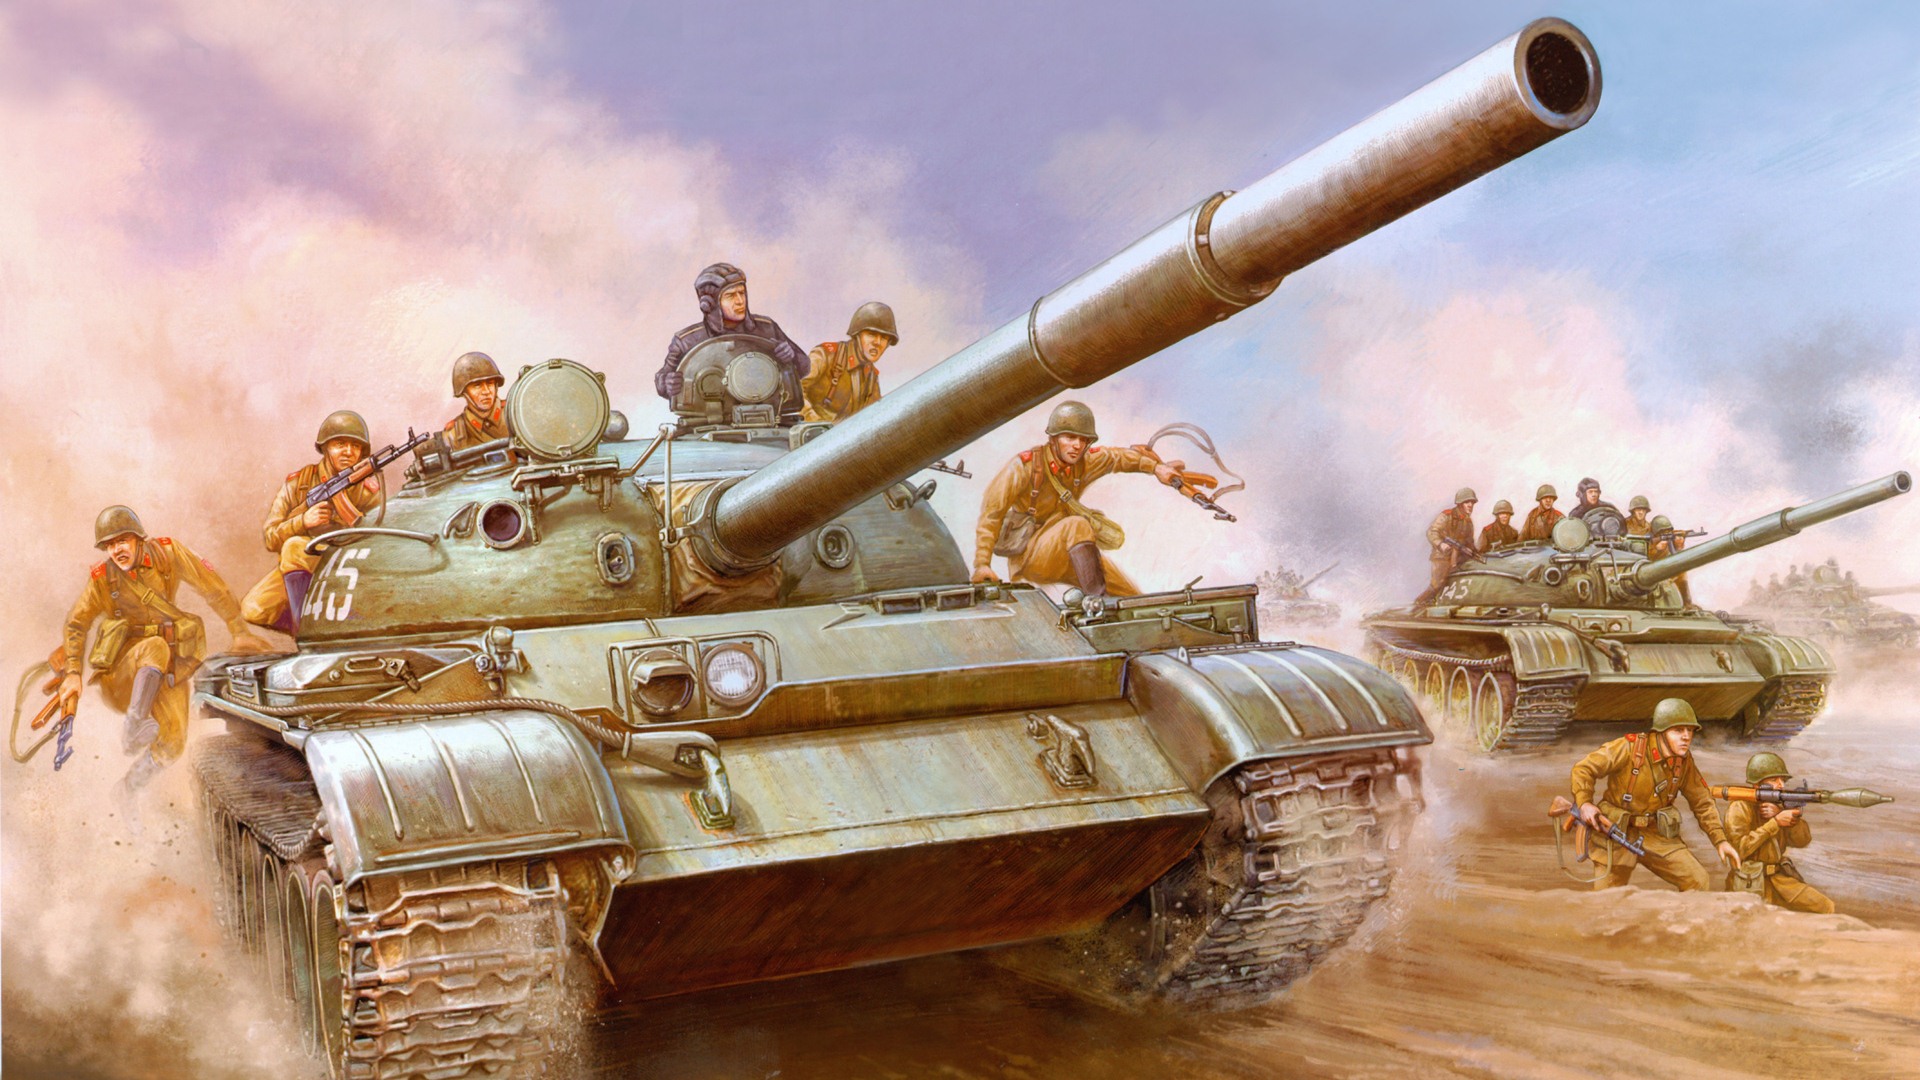 Military tanks, armored HD painting wallpapers #16 - 1920x1080